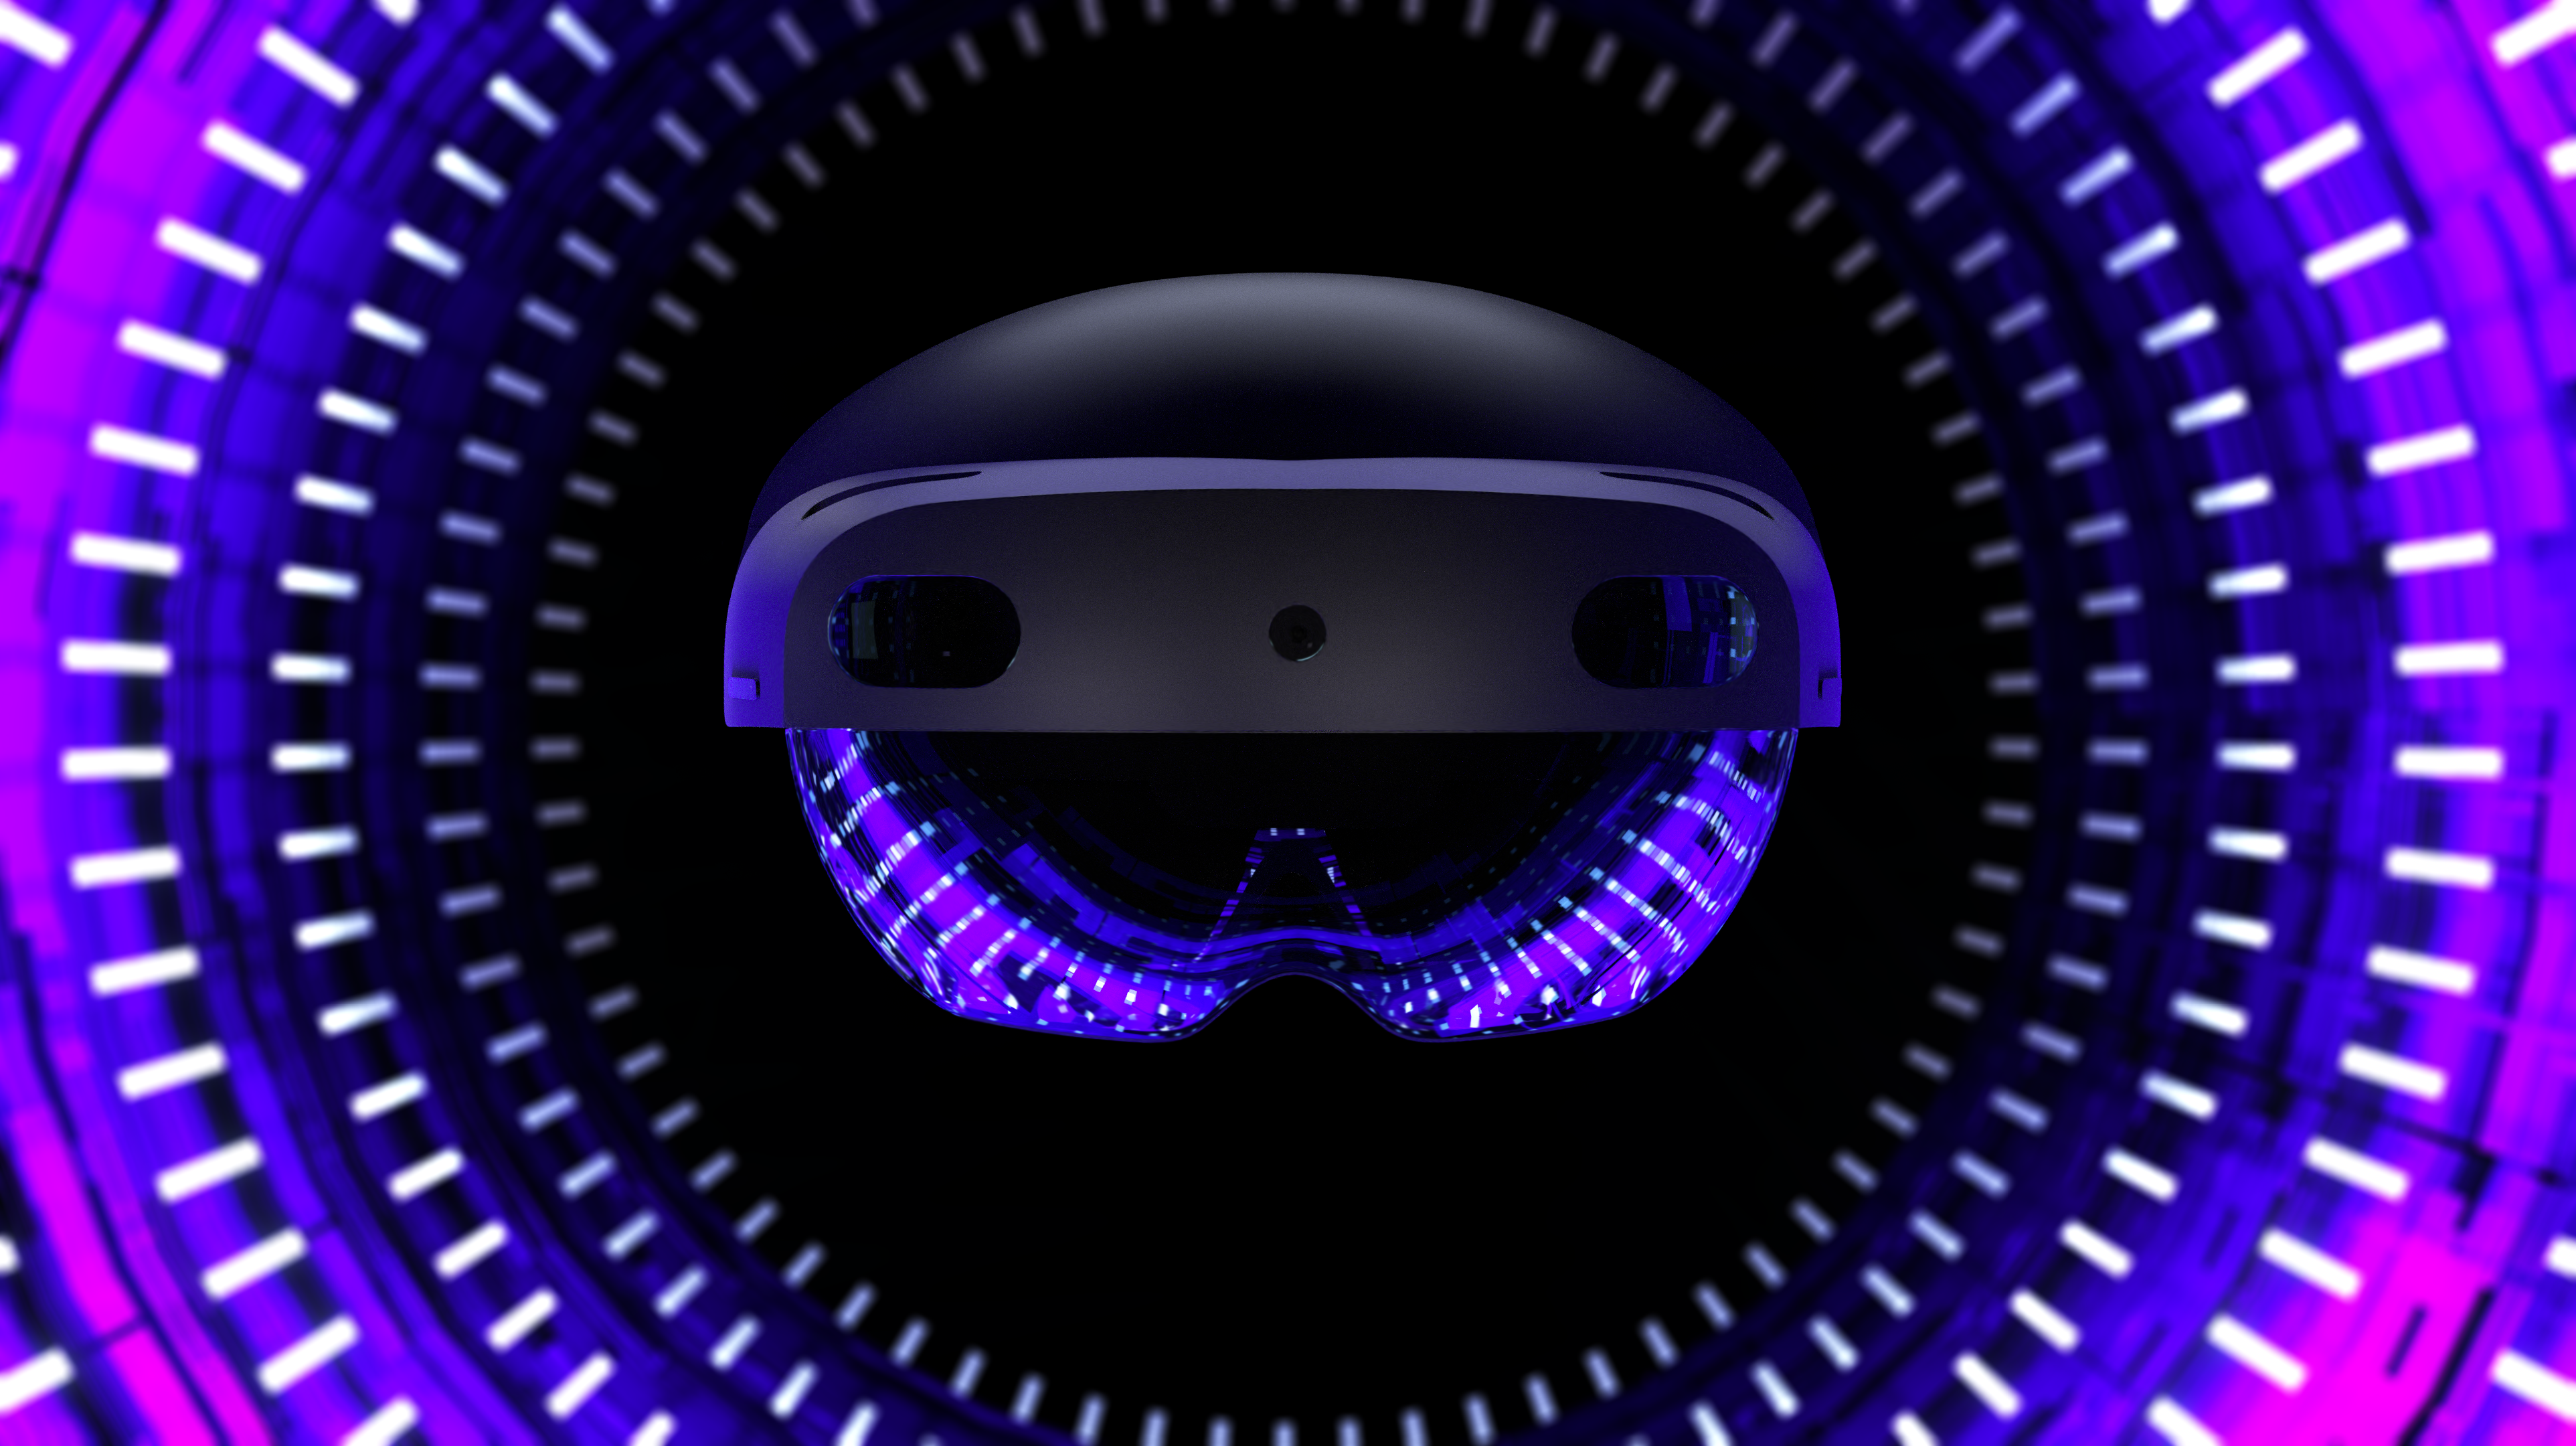 A front view of a HoloLends headset on black background, surrounded by rings that gradually transition to purple. Each ring also contains white lights that are reflected on the headset.